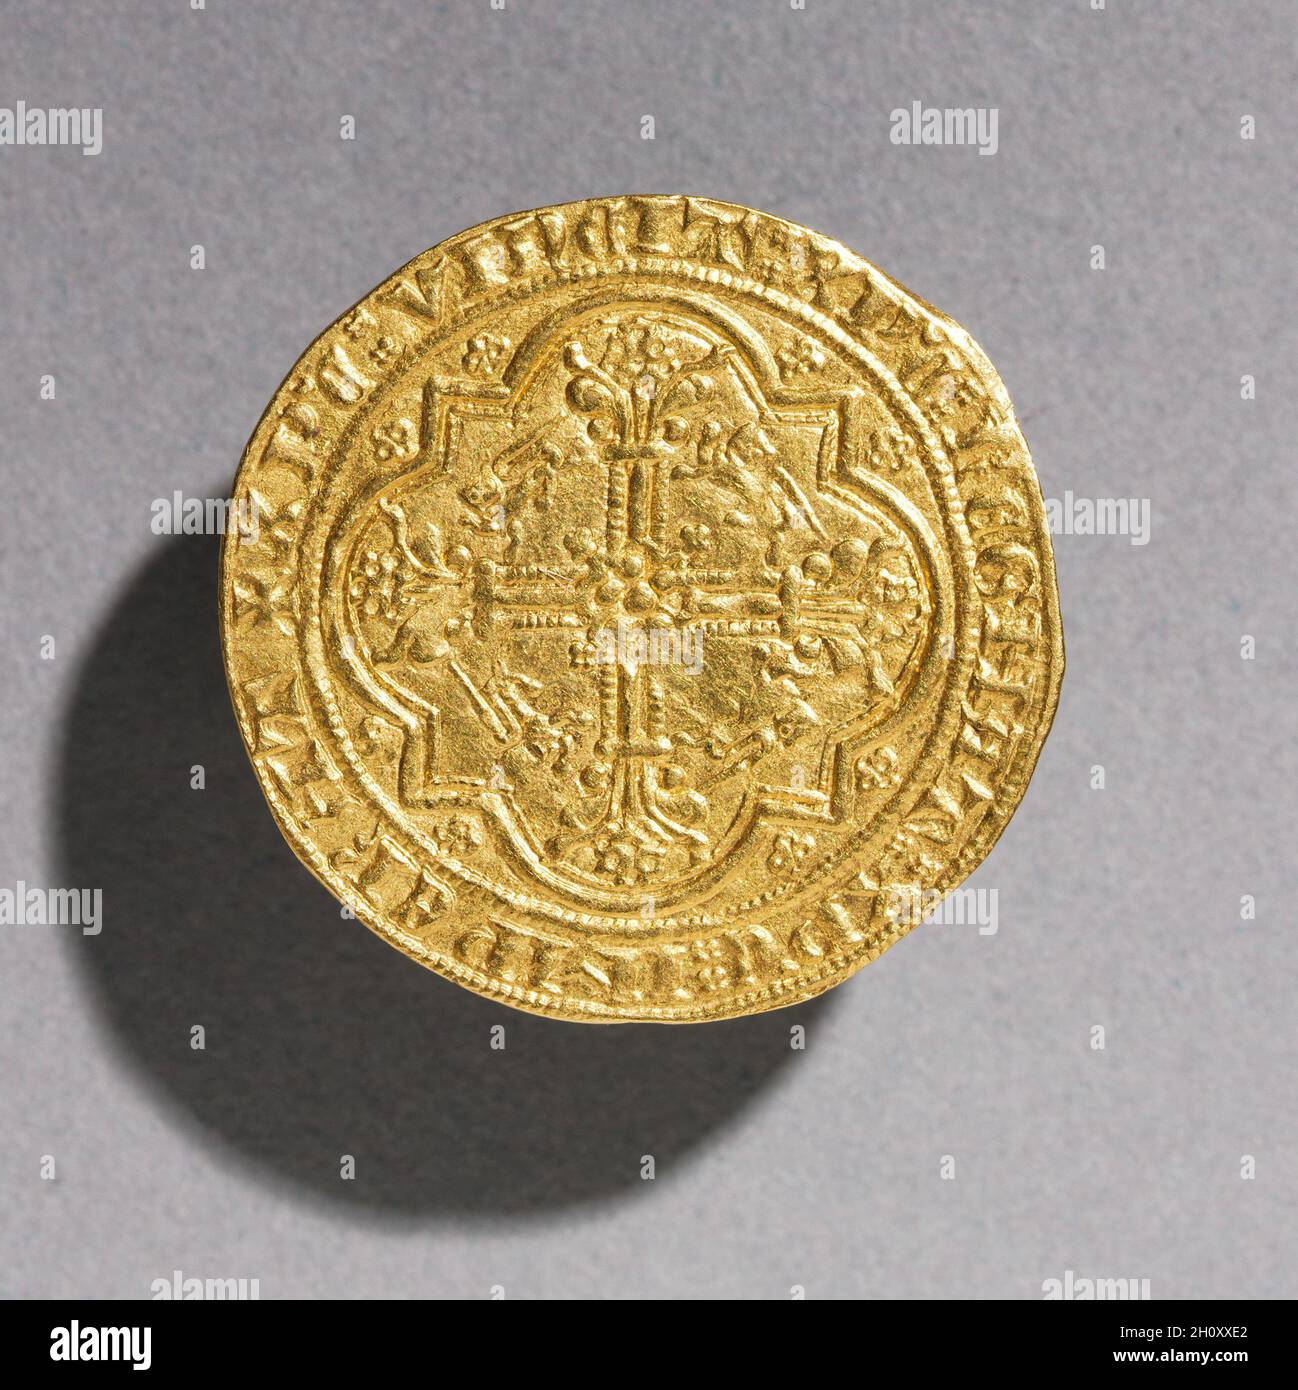 Leopard d'Or of Edward III of England (reverse), 1327-1377. England, Anglo-Gallic, Gothic period, 14th century. Gold; diameter: 3.4 cm (1 5/16 in.).  Known as a 'Golden Leopard' because of the crowned leopard on one side, this gold coin was minted for Edward III, king of England and France. Stock Photo